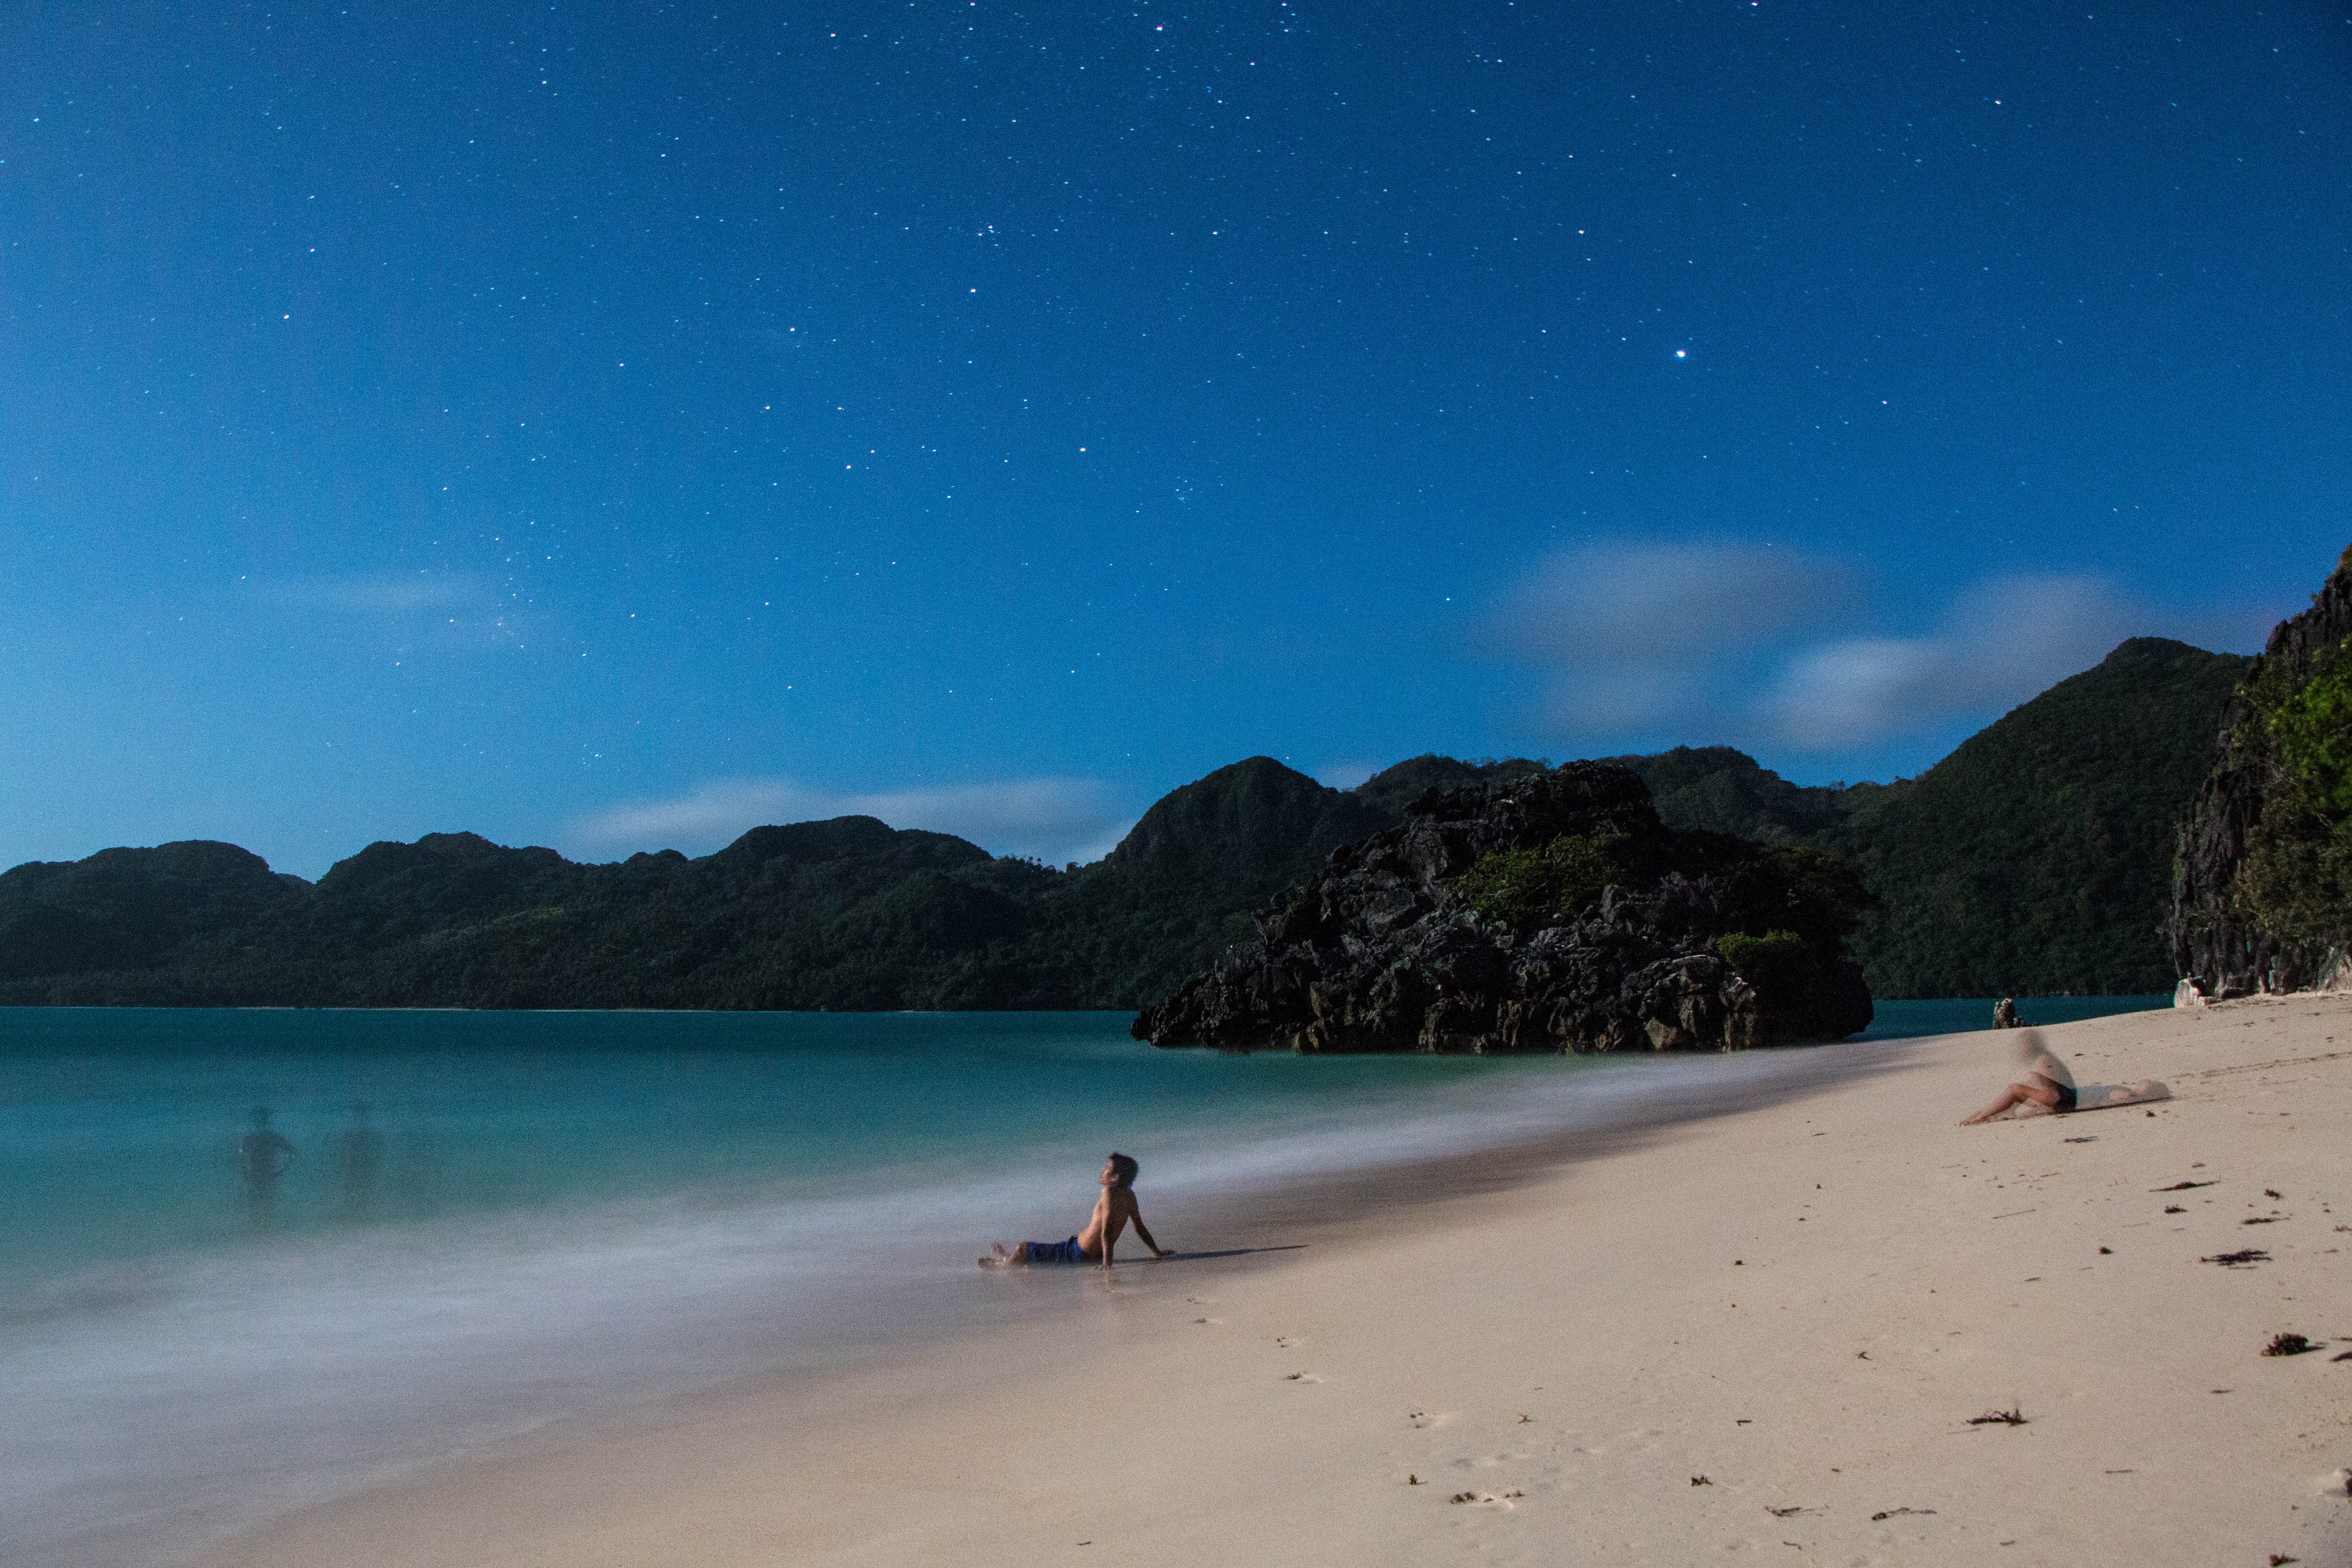 A night swim is one great way to cap off a day of island-hopping. Photo by Ramir G. Cambiado   